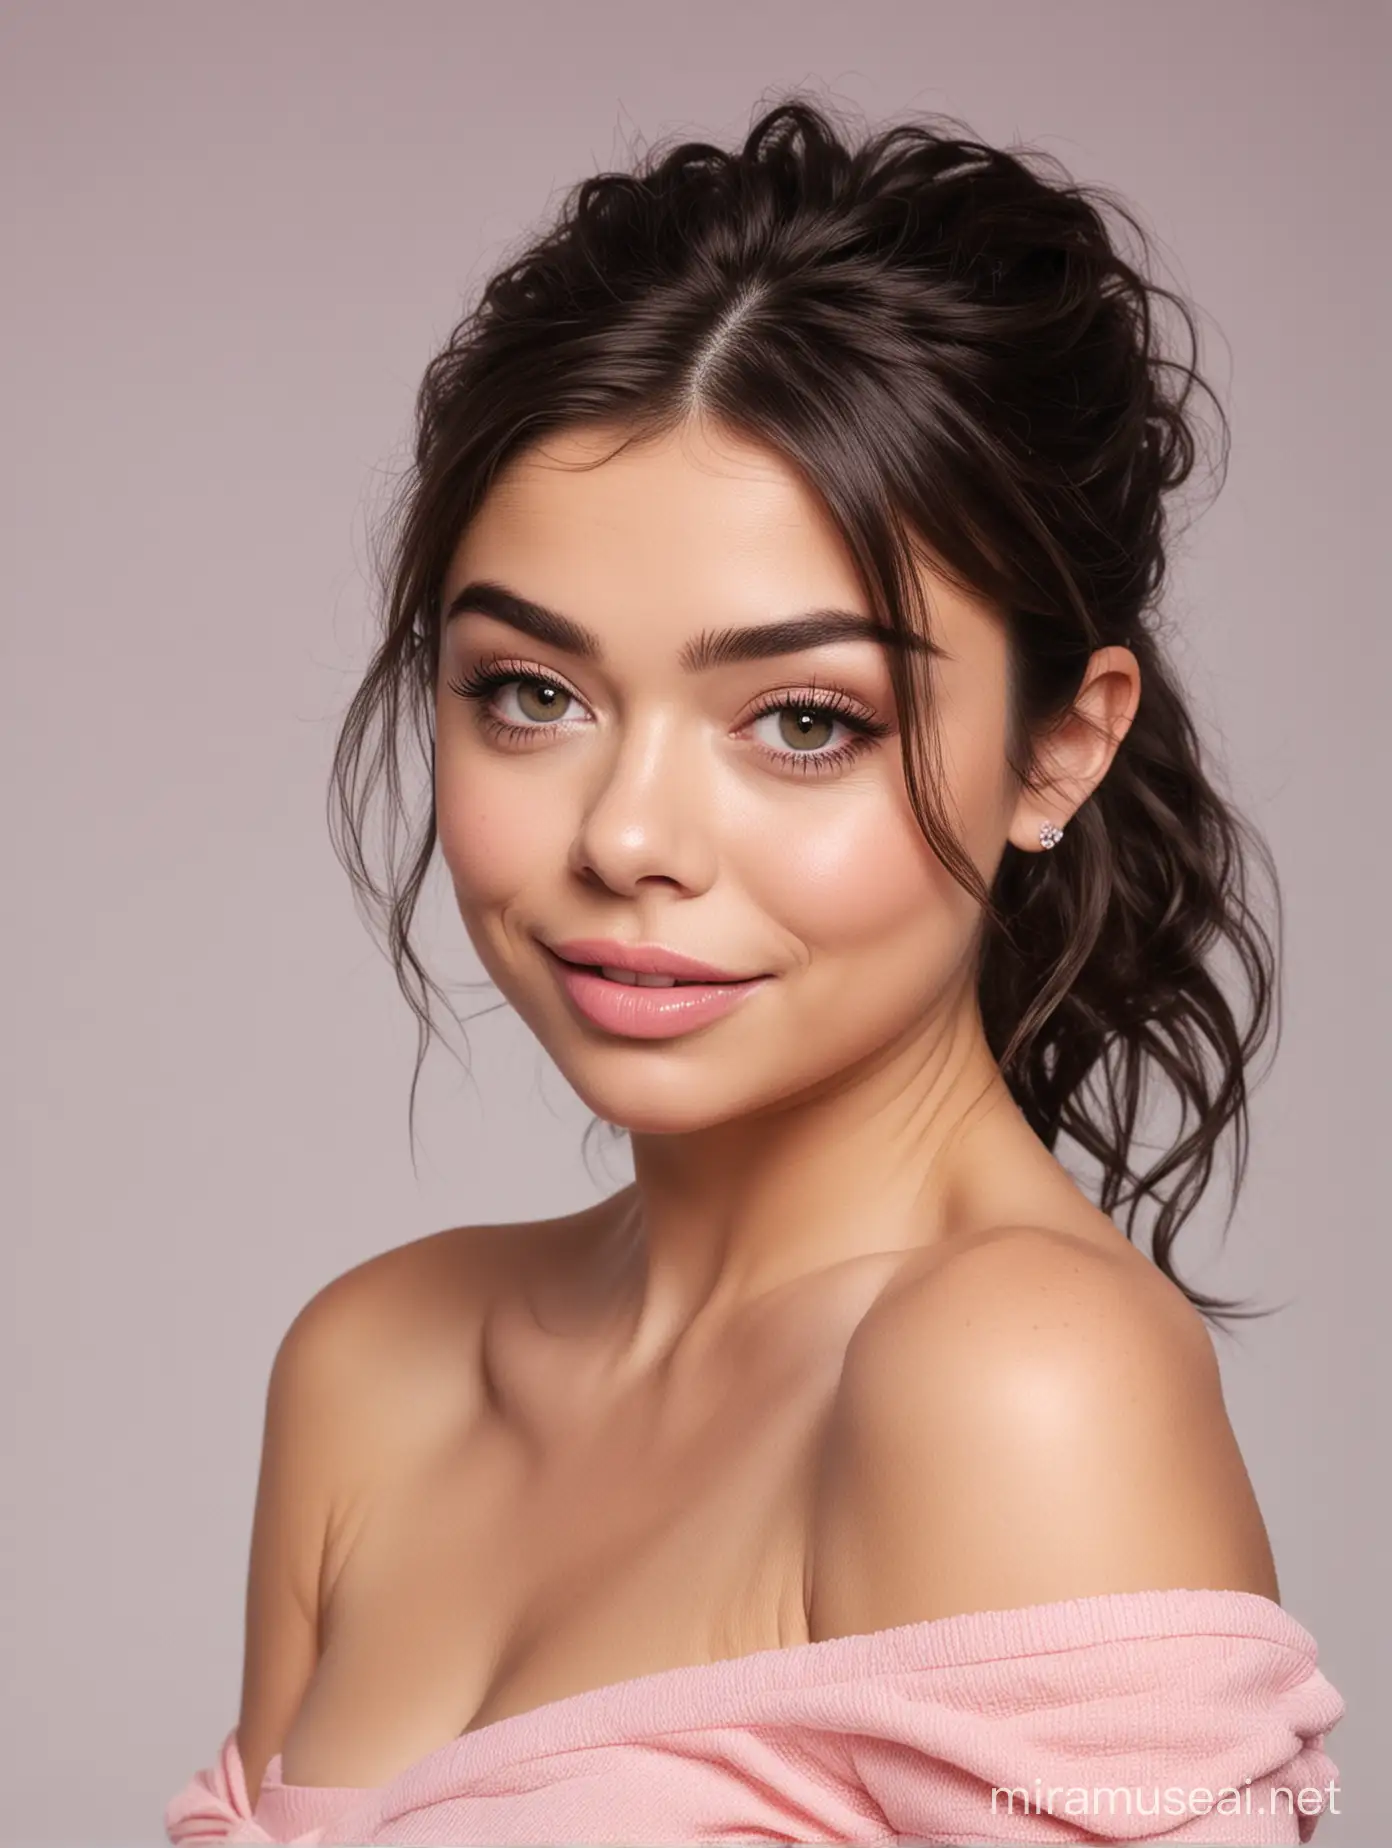 In front of a white background wall, stands an innocent and adorable ((Sarah Hyland)). Her face is round, with a hint of rosy cheeks. She has a full, plump face, reminiscent of a baby’s chubby cheeks. Her eyes are large, round, and expressive, adorned with long eyelashes and a touch of pink eyeshadow. In the frame, she smiles at the camera, her lips closed, highlighting her prominent facial features and athletic physique. Her skin appears smooth and radiant, with a dewy glow. Her jet-black hair cascades beautifully. She wears a pink form-fitting top without shoulder straps, revealing her bare shoulders, arms, and waist. The minimal accessories add an exquisite touch. Below, she dons sheer stockings, showcasing flawless, fair thighs that invite a lingering gaze. The overall composition exudes exceptional quality, with superb attention to detail and crisp rendering.